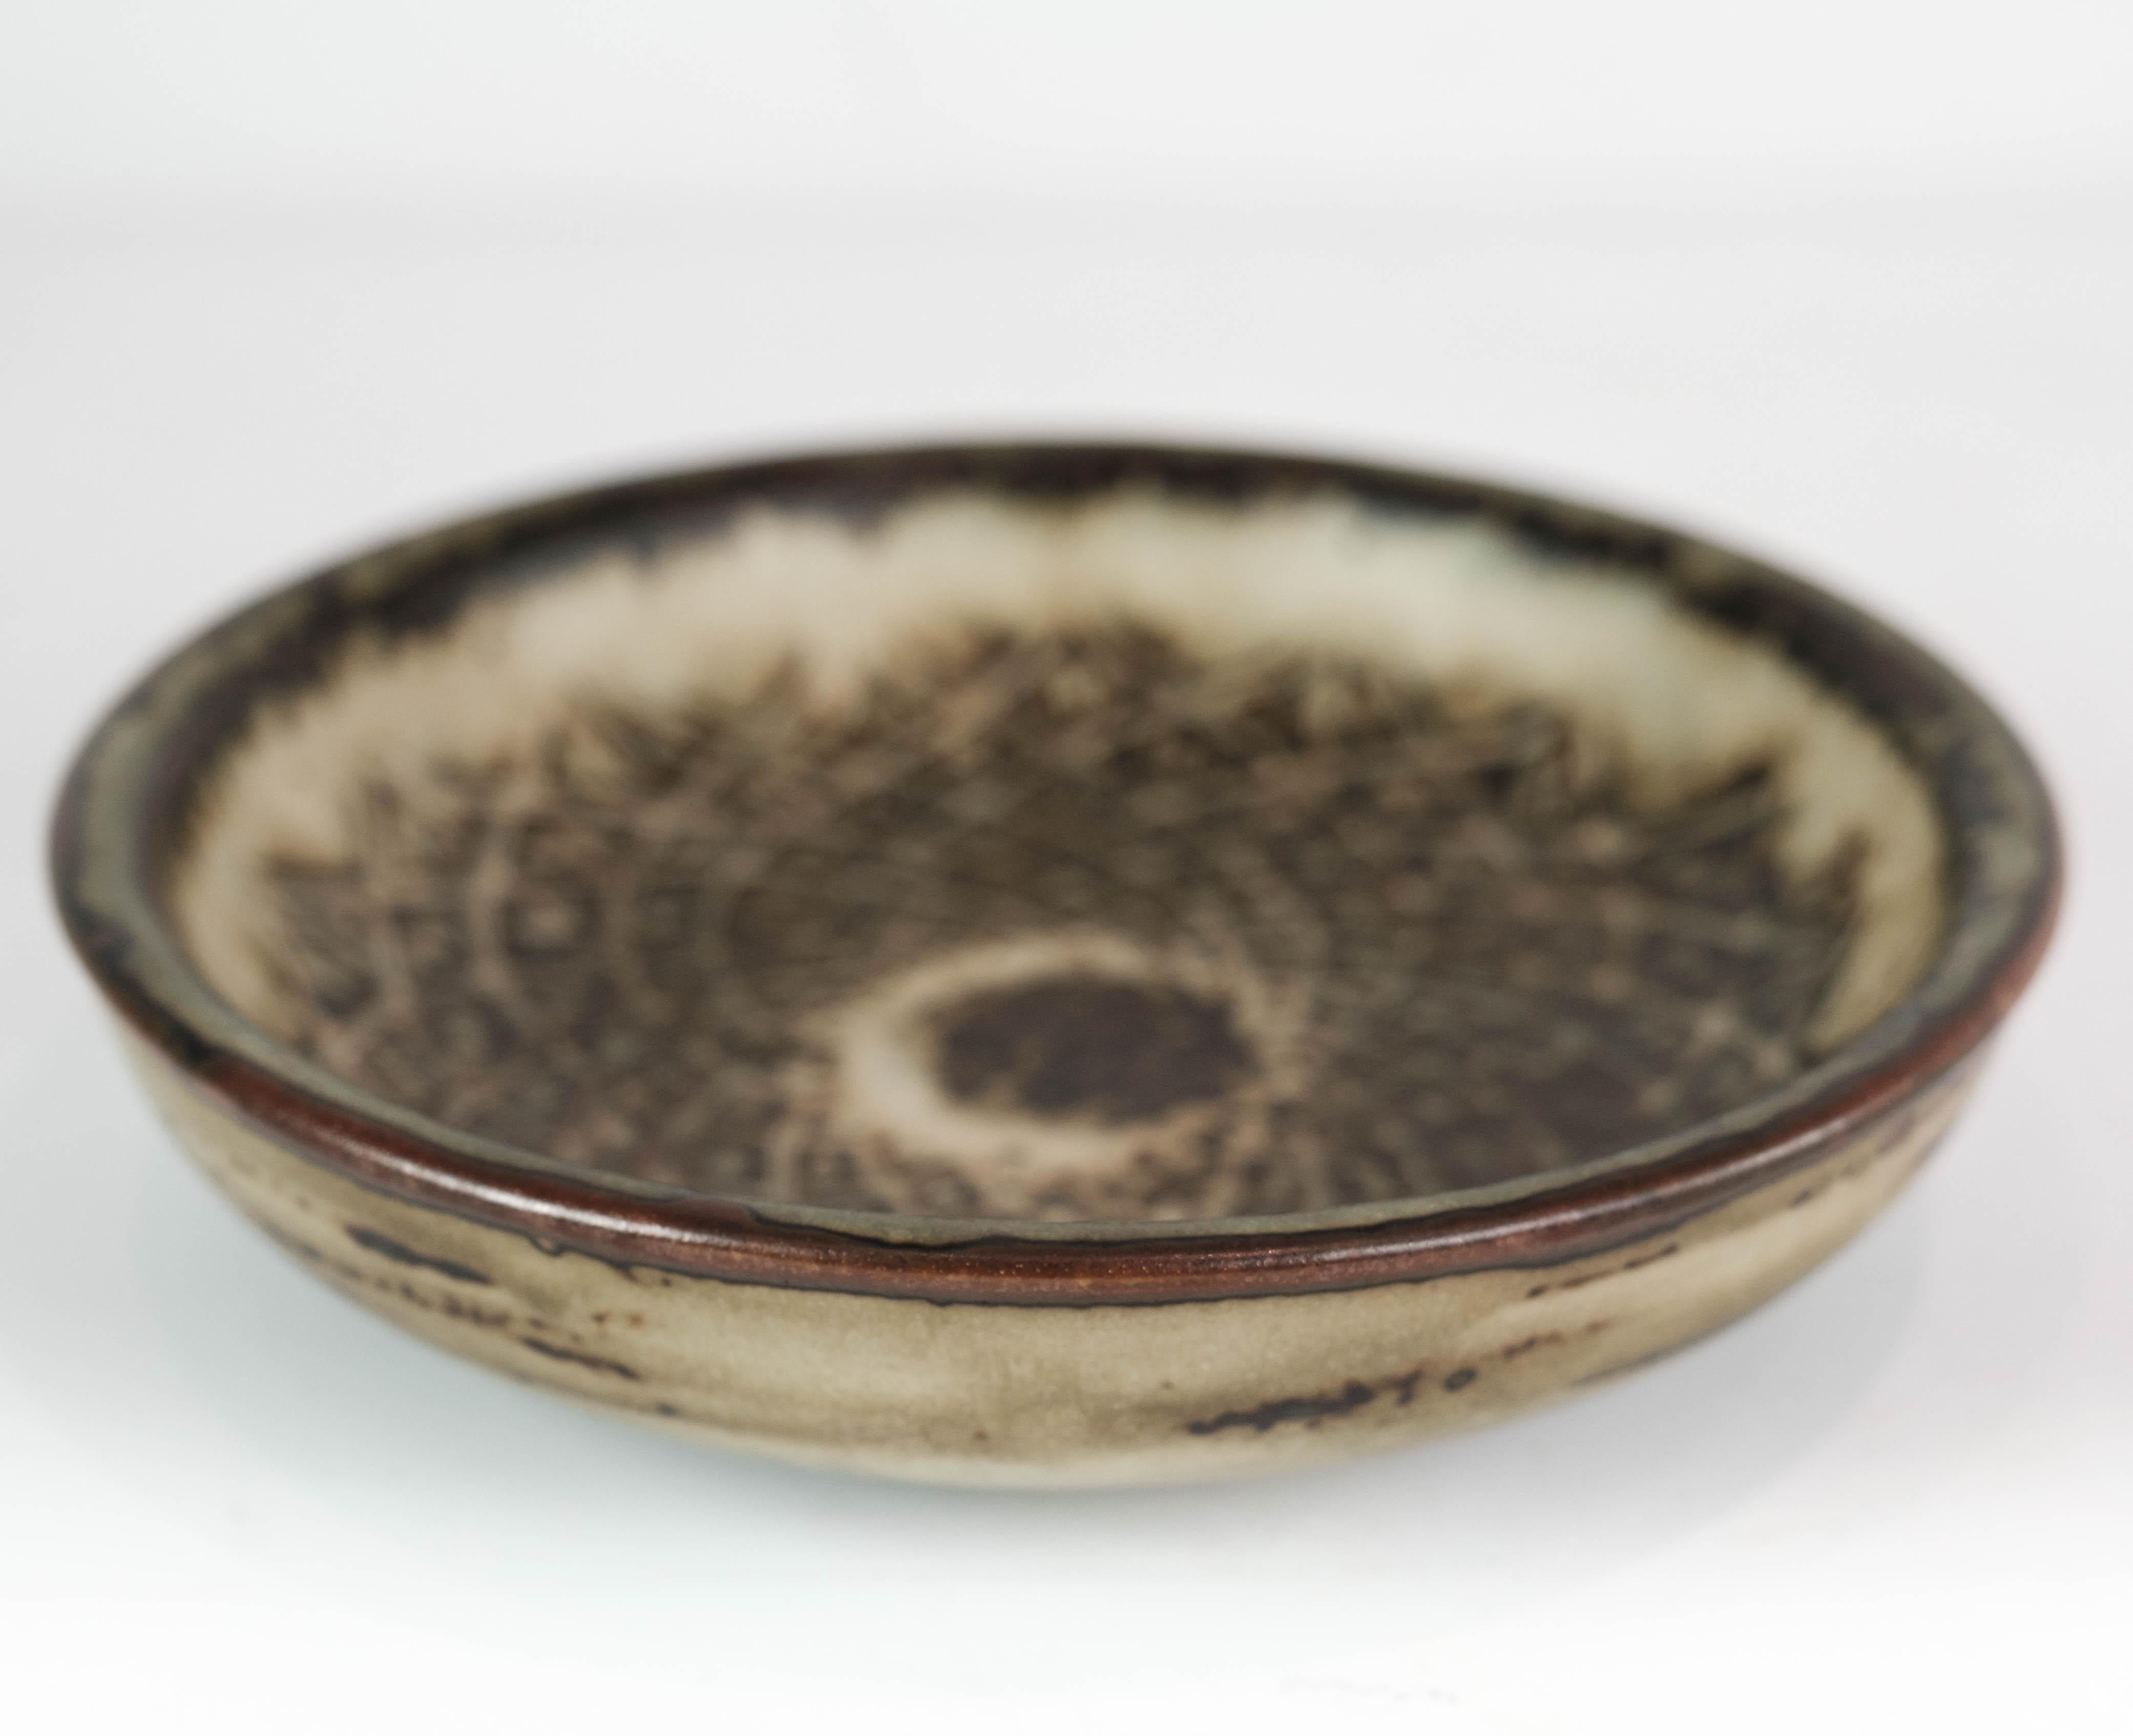 Mid-Century Modern Stoneware Bowl In Brown Colors No. 21567 By Gerd Bøgelund From 1960s For Sale